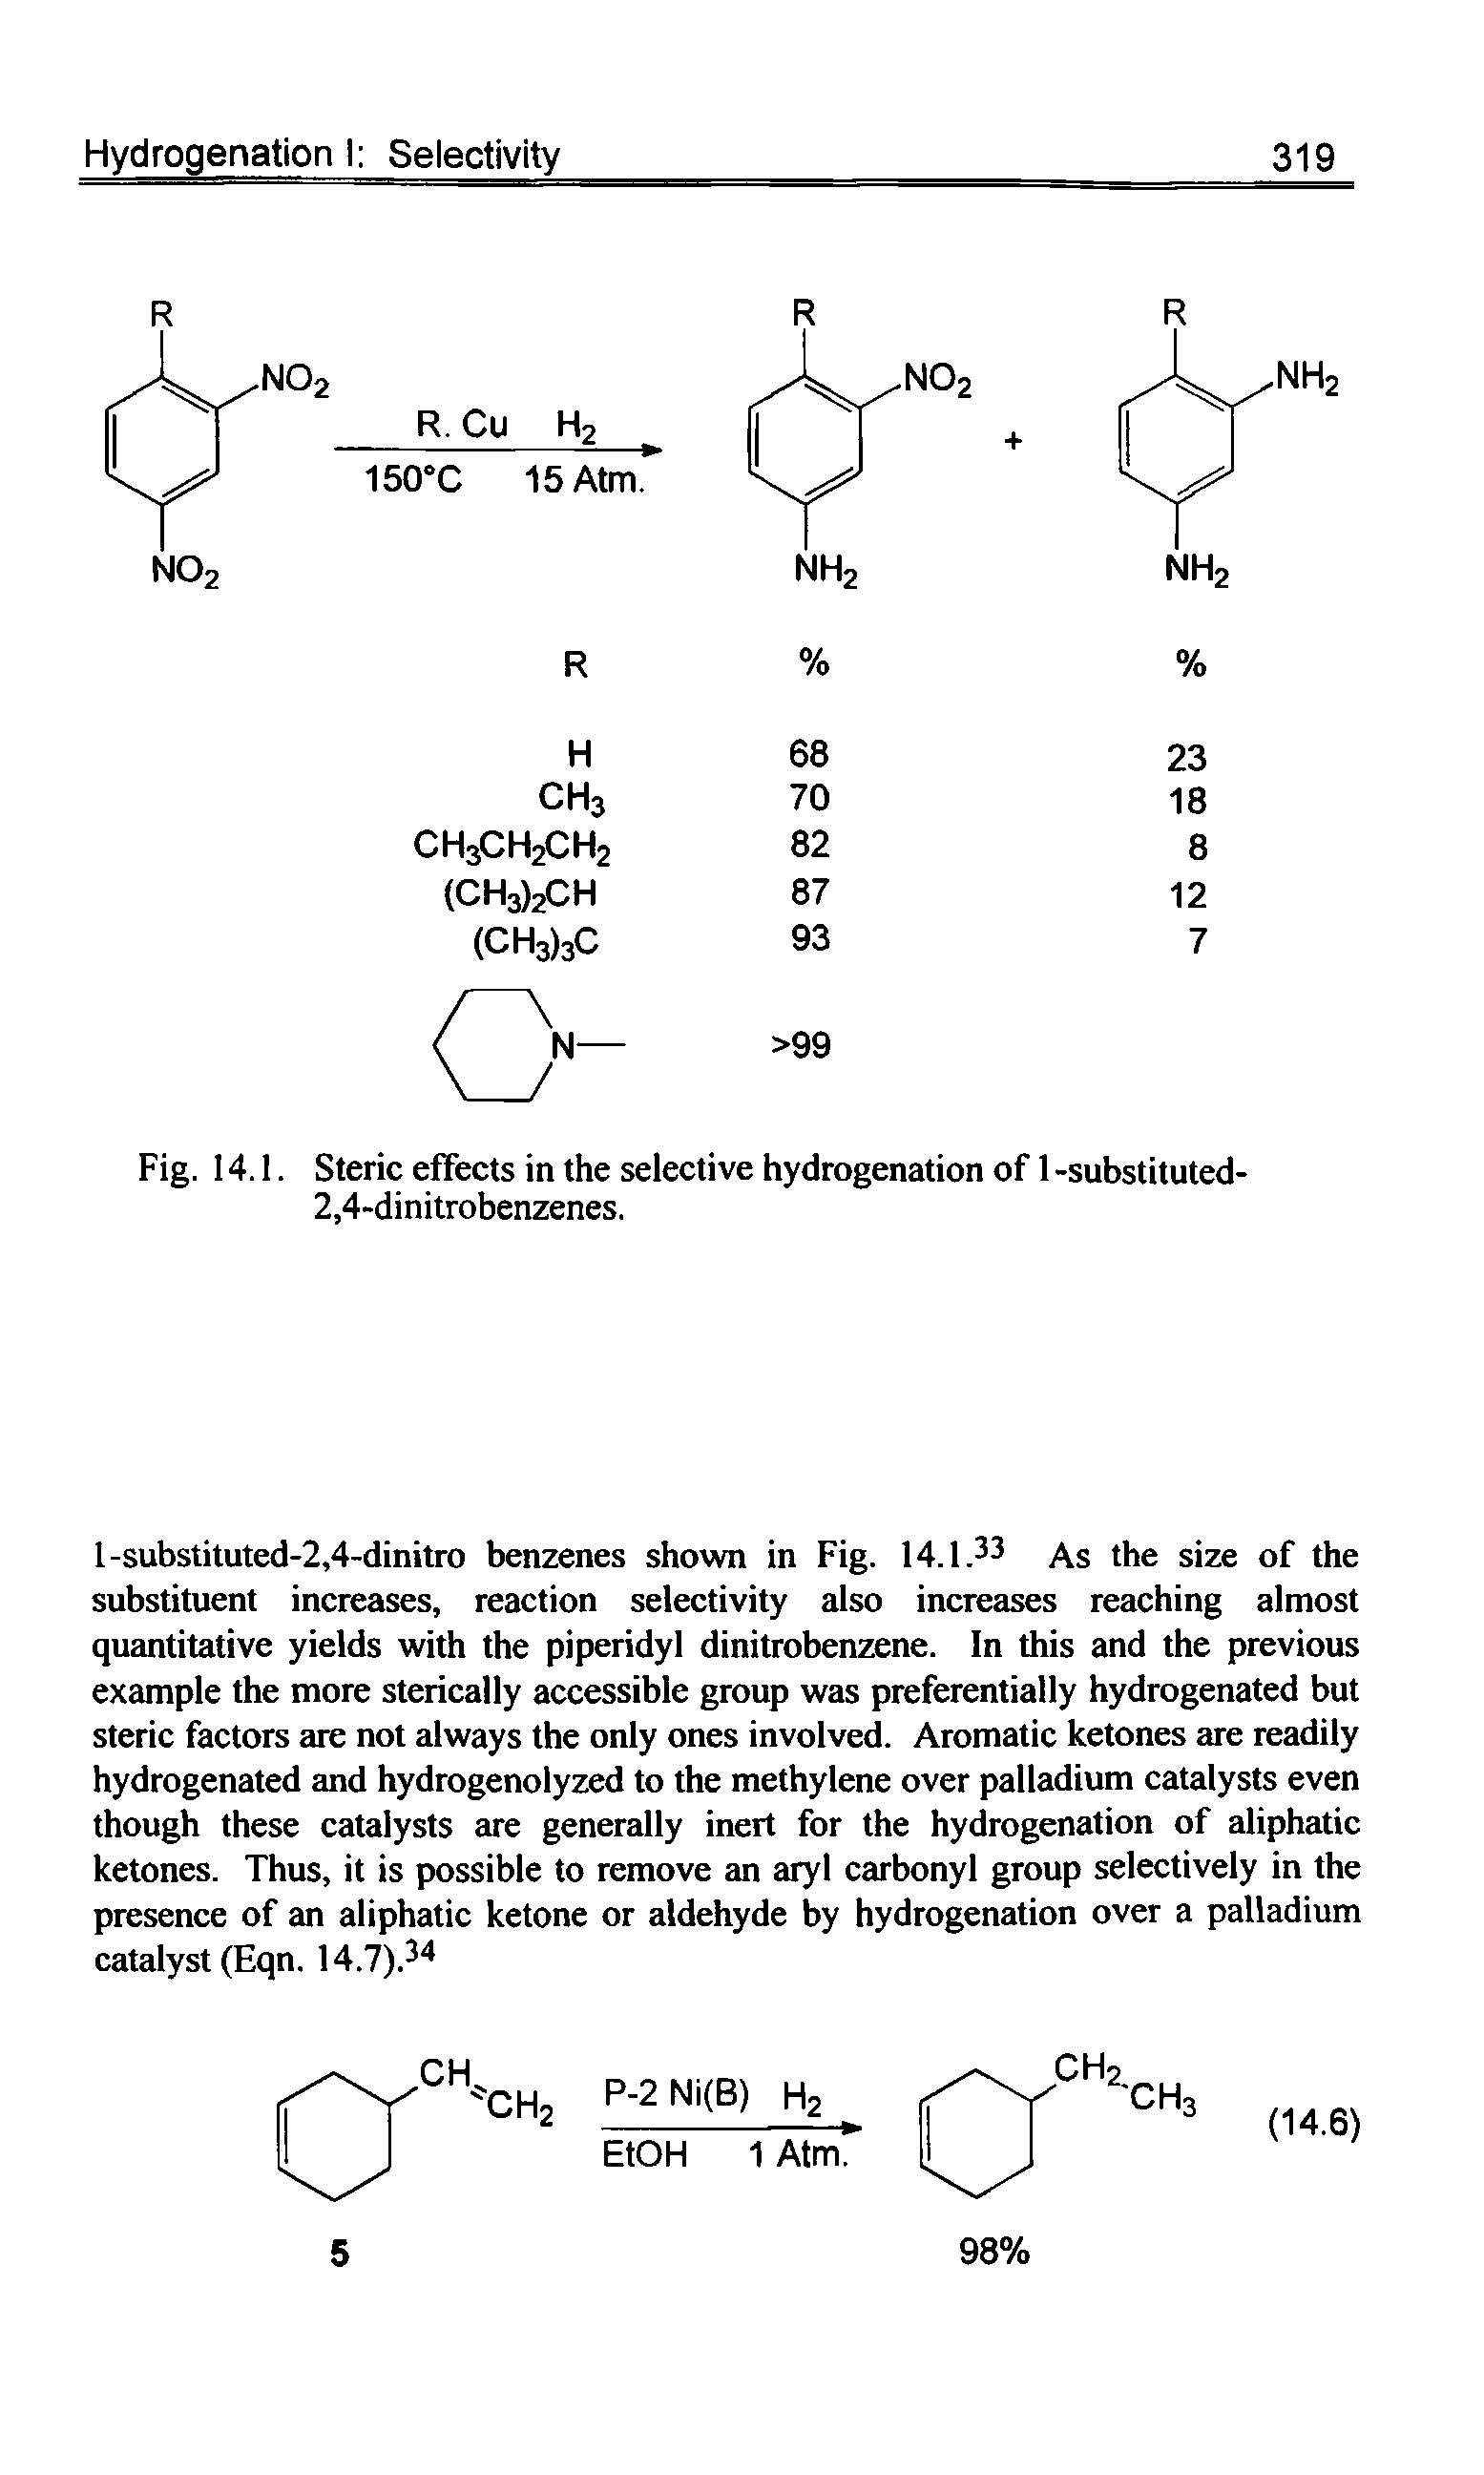 Fig. 14.1. Steric effects in the selective hydrogenation of 1 -substituted-2,4-dinitrobenzenes.